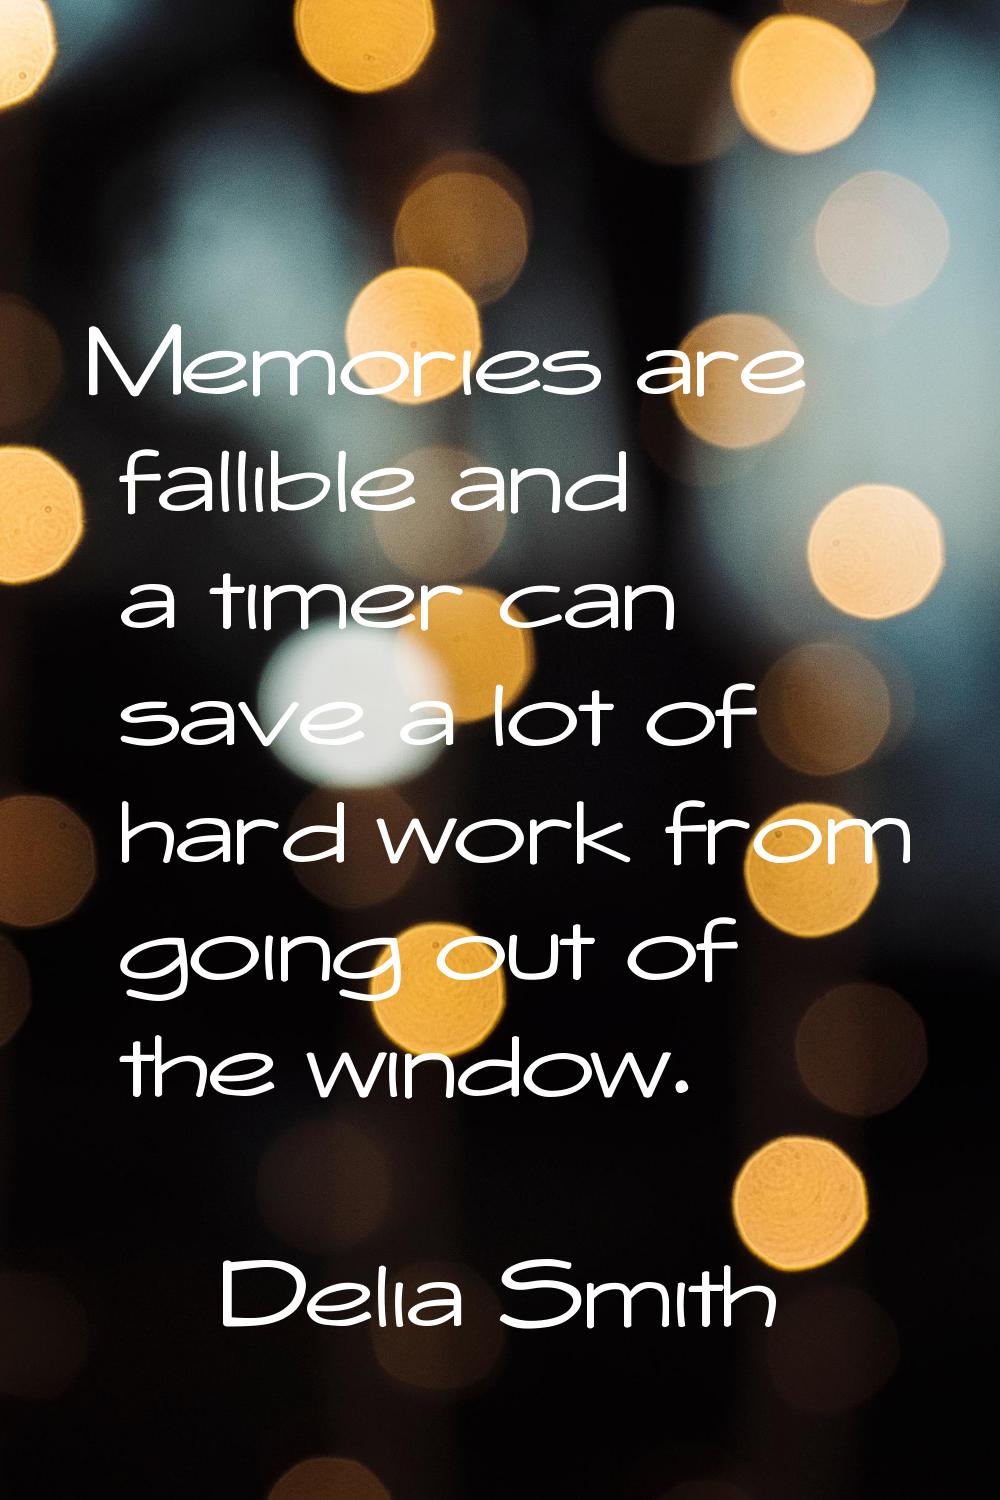 Memories are fallible and a timer can save a lot of hard work from going out of the window.